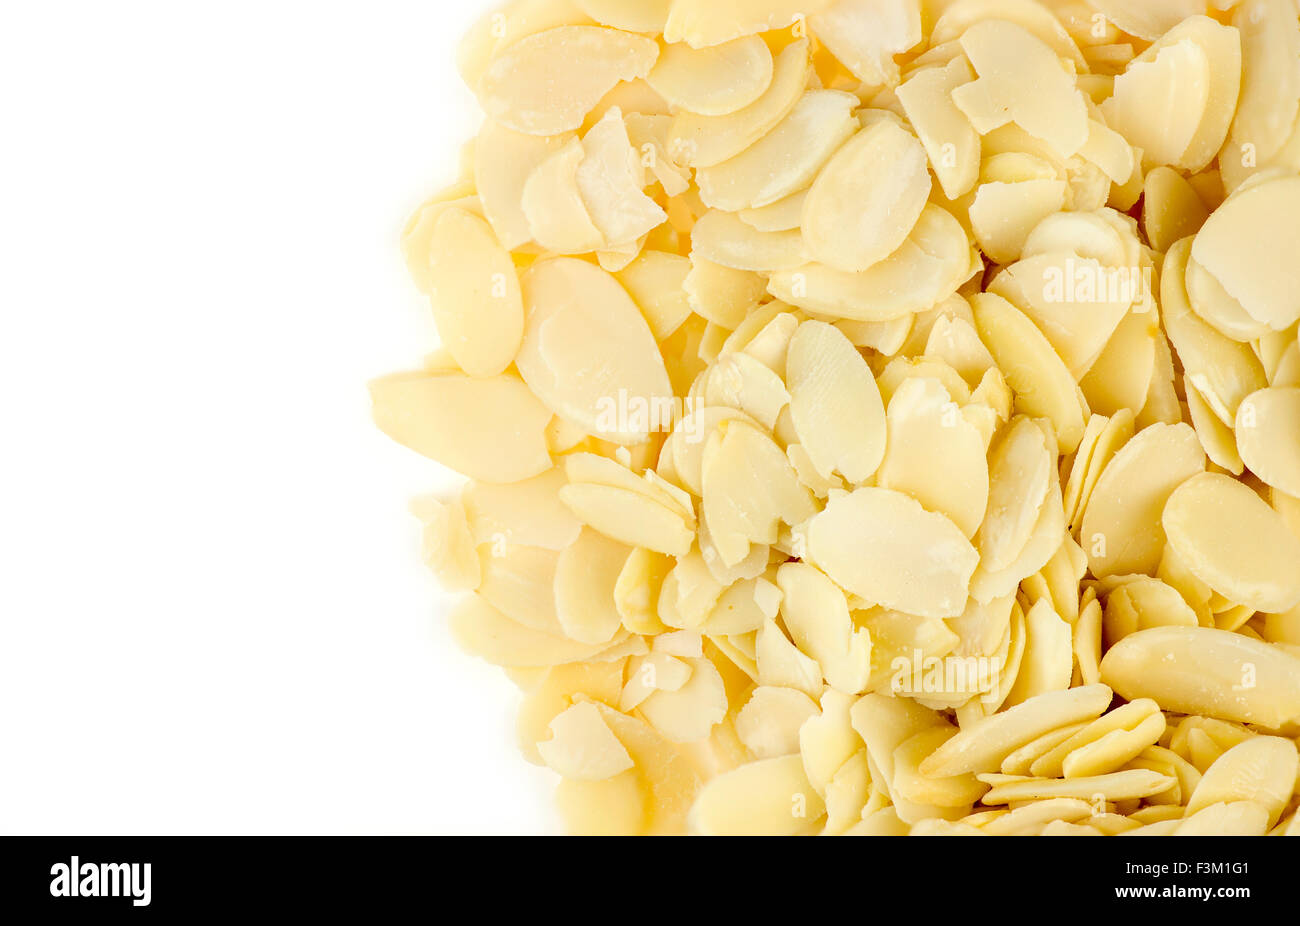 Aerial view of almond flakes with white copyspace Stock Photo